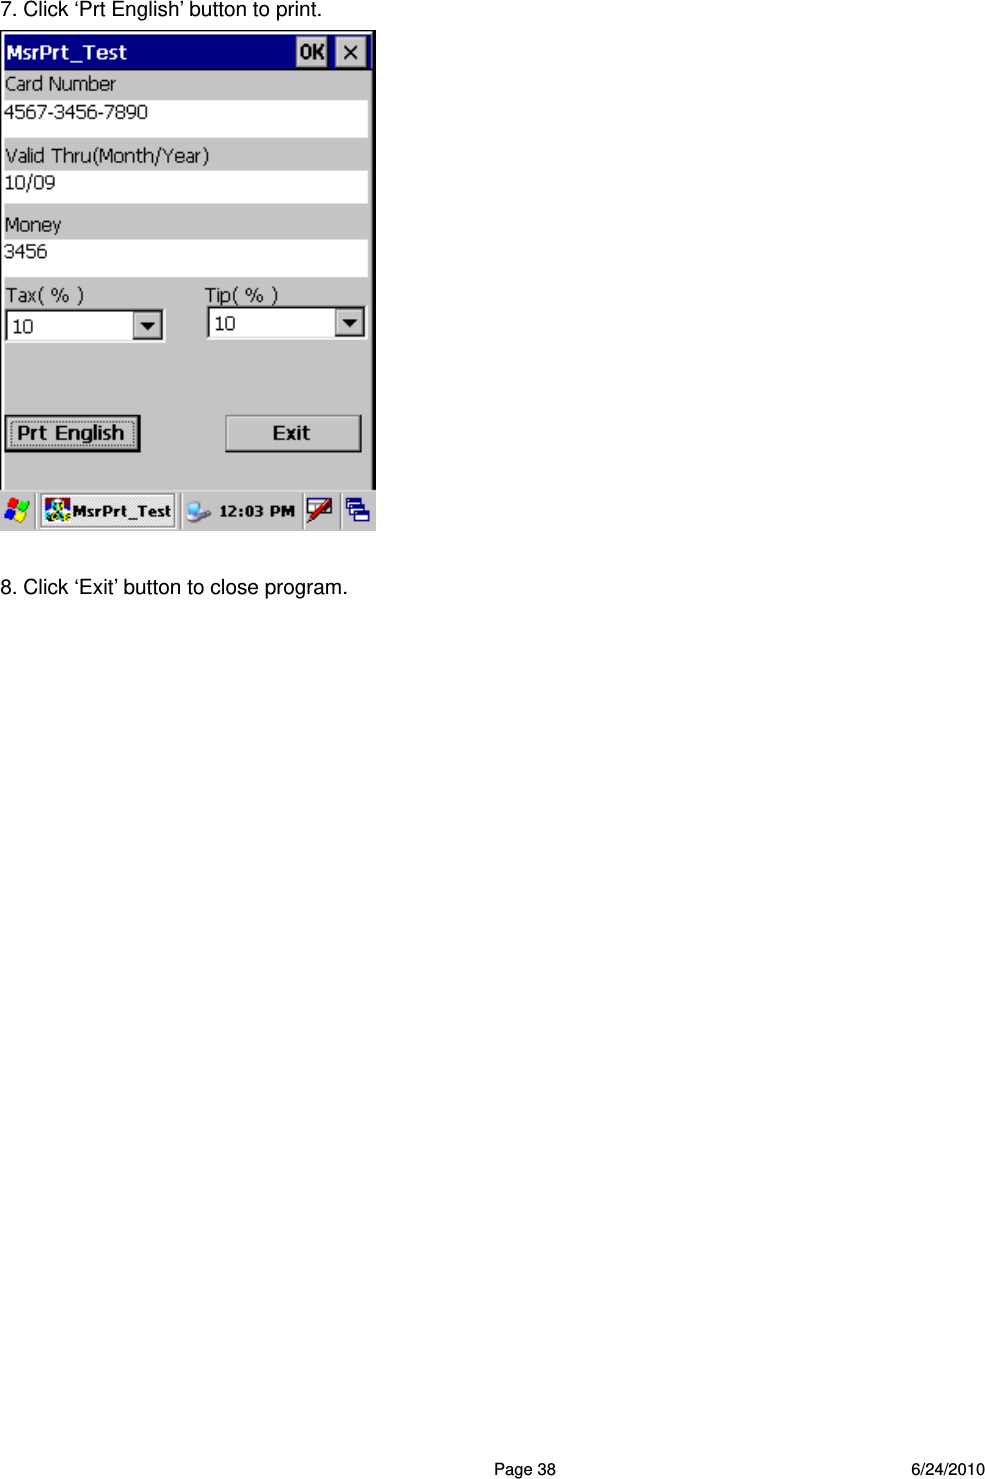  Page 38 6/24/2010 7. Click ‘Prt English’ button to print.   8. Click ‘Exit’ button to close program.                        